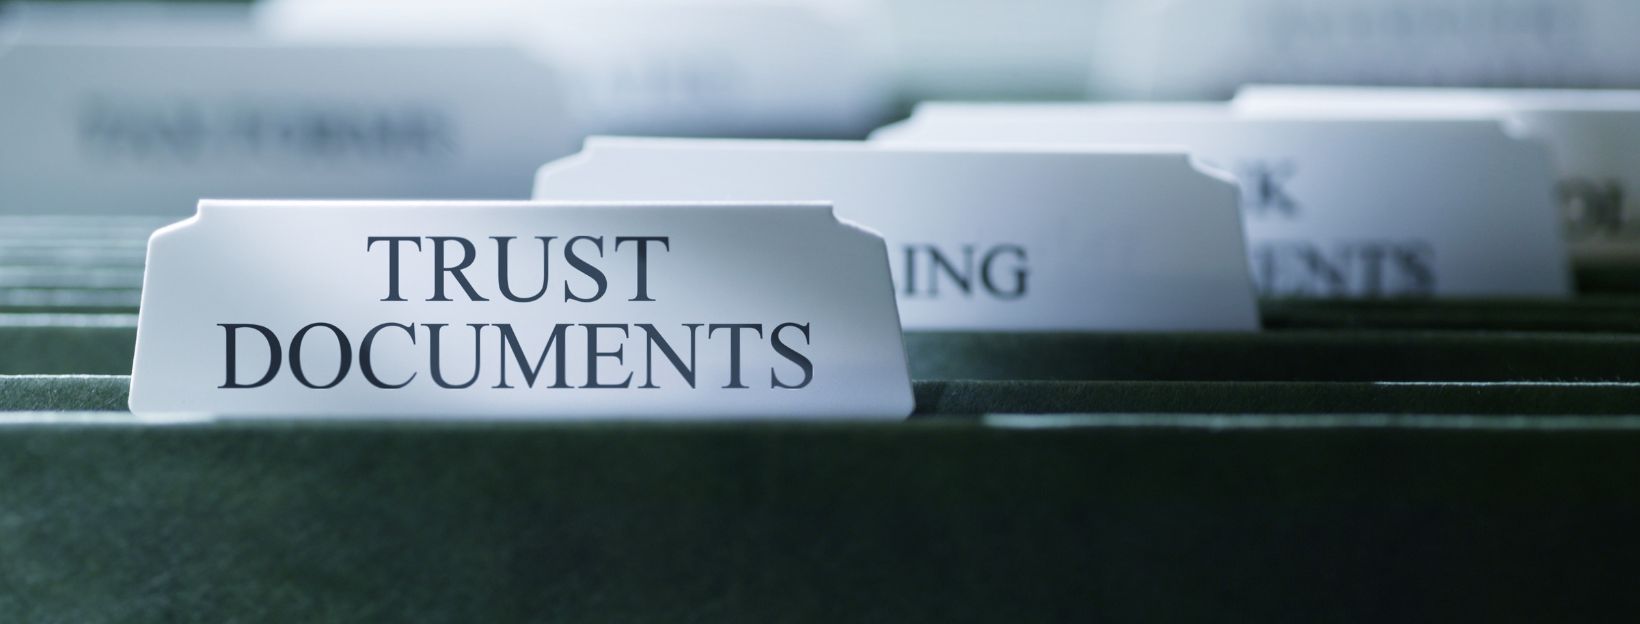 An Overview of Trusts and the Trustee's Role